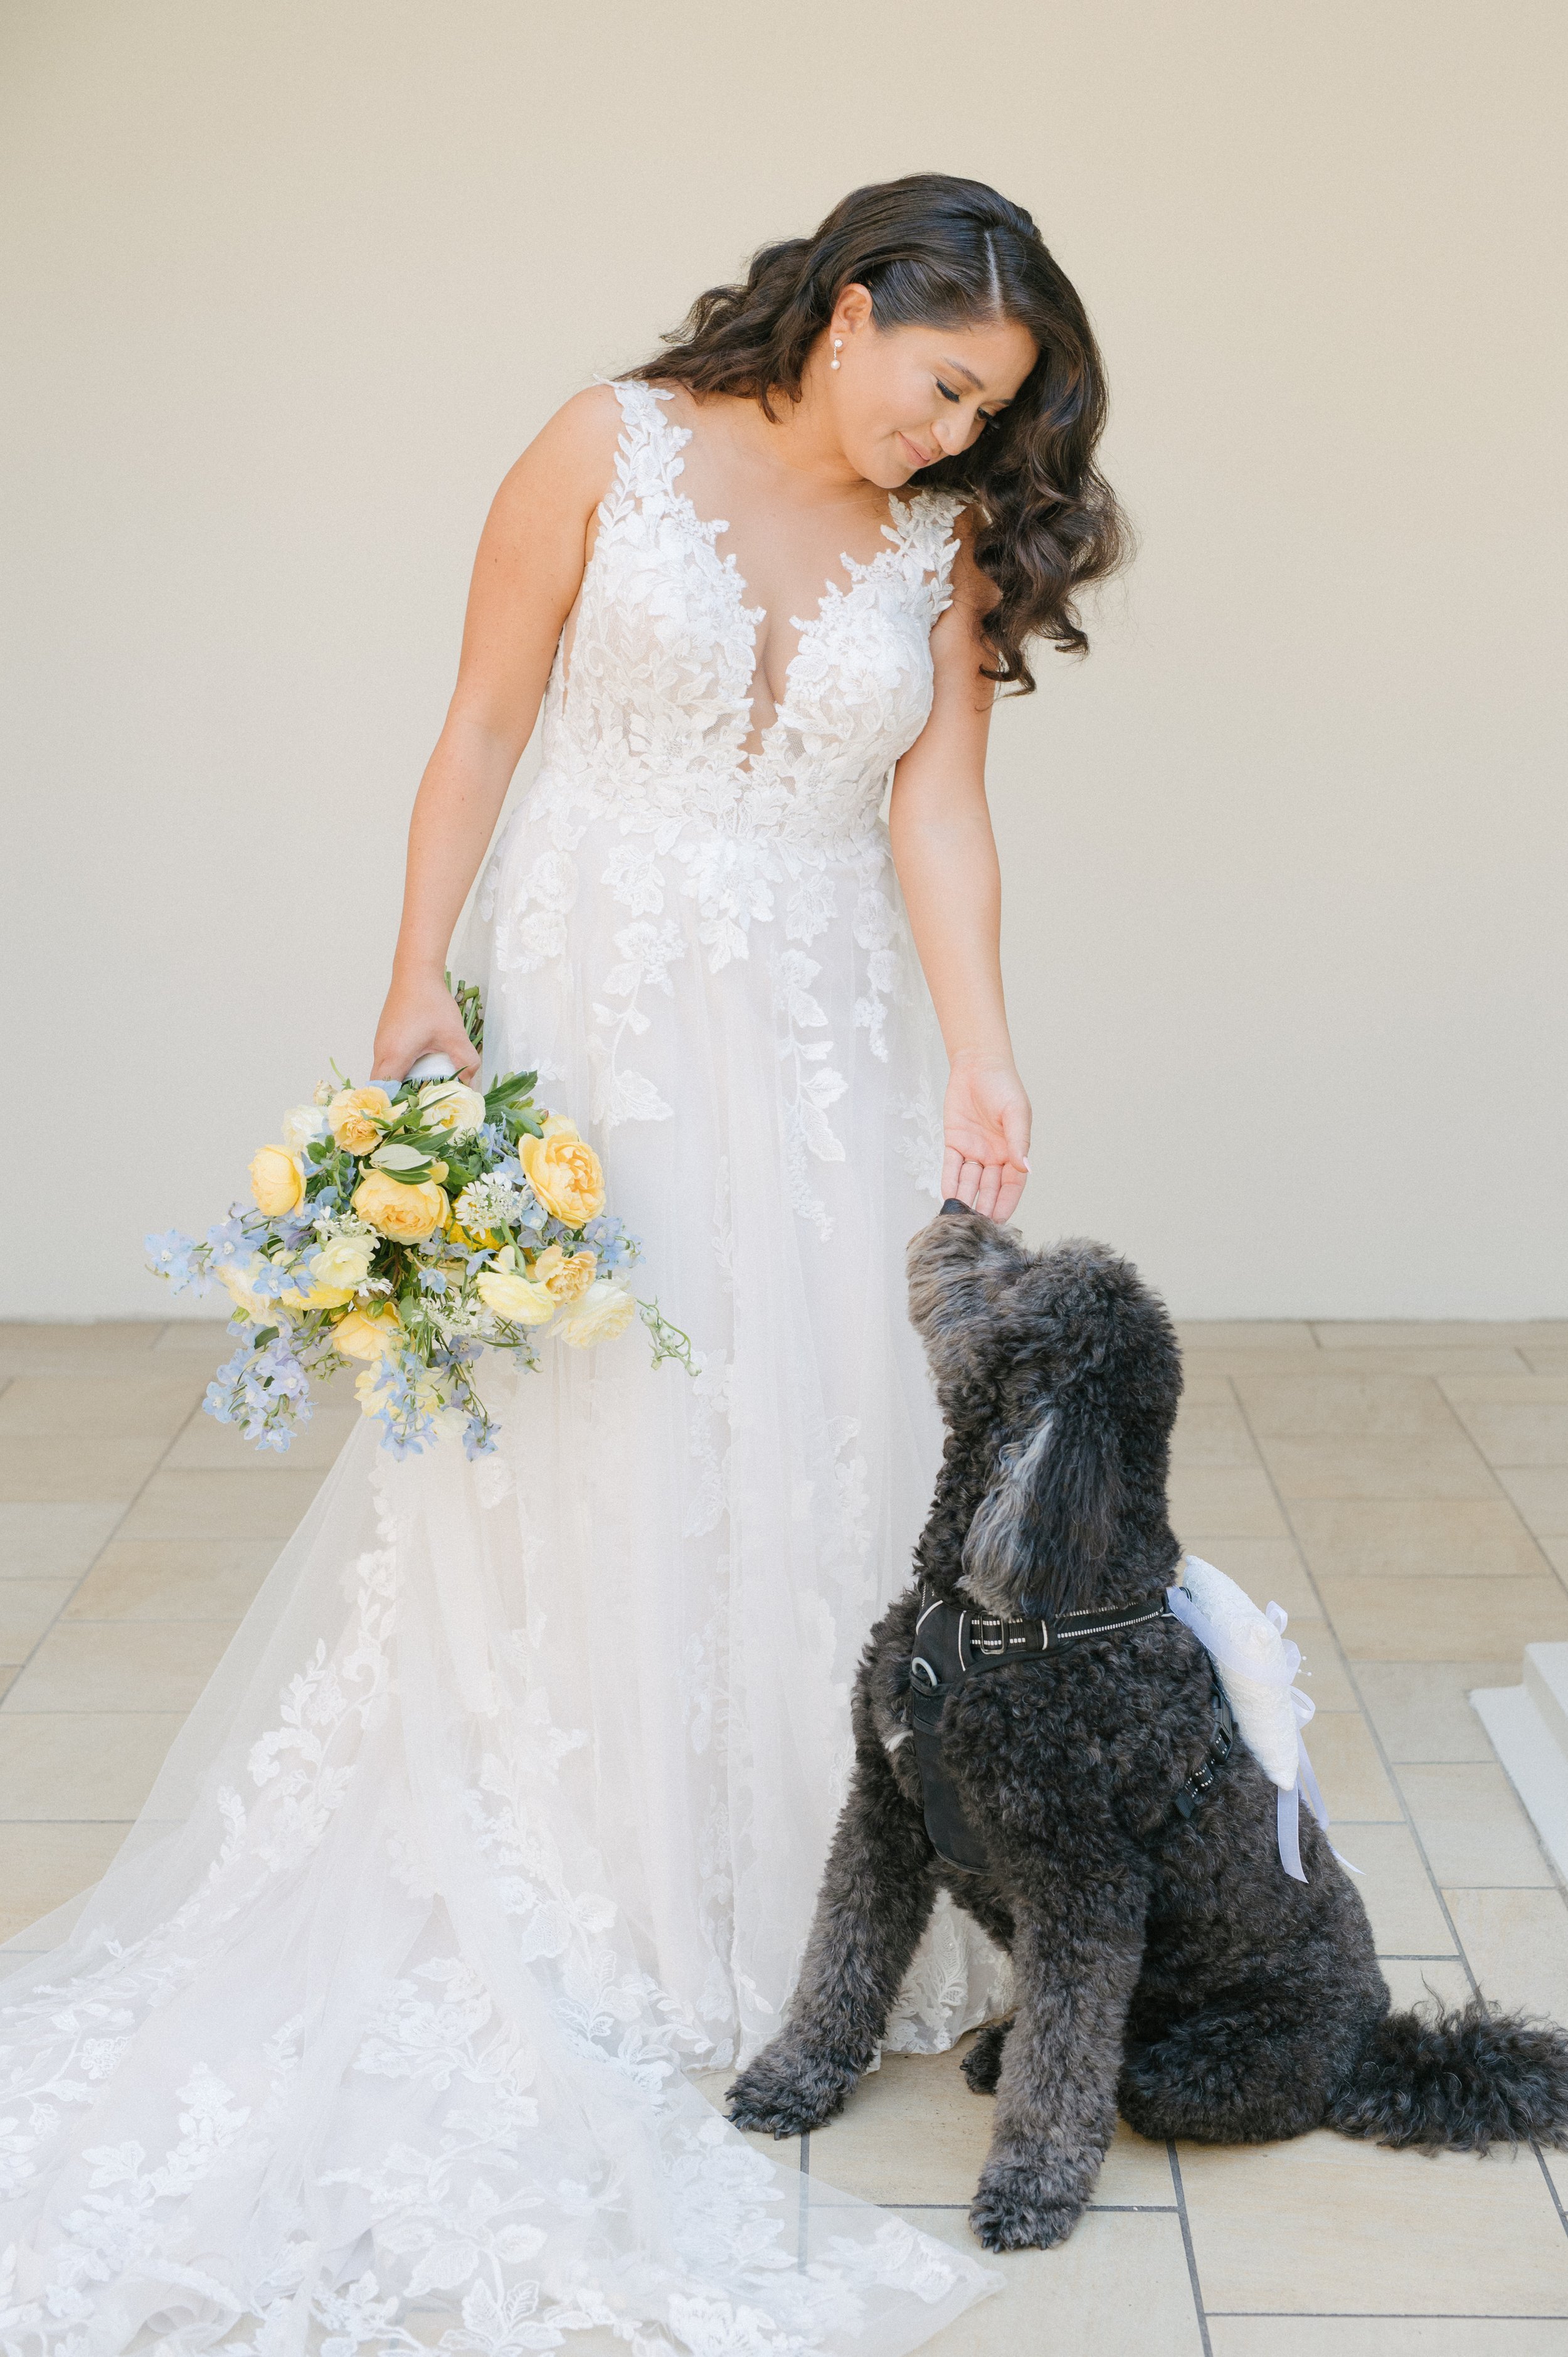 www.santabarbarawedding.com | Haley Garces Photography | Bride with Bouquet Petting Her Dog Before the Ceremony 